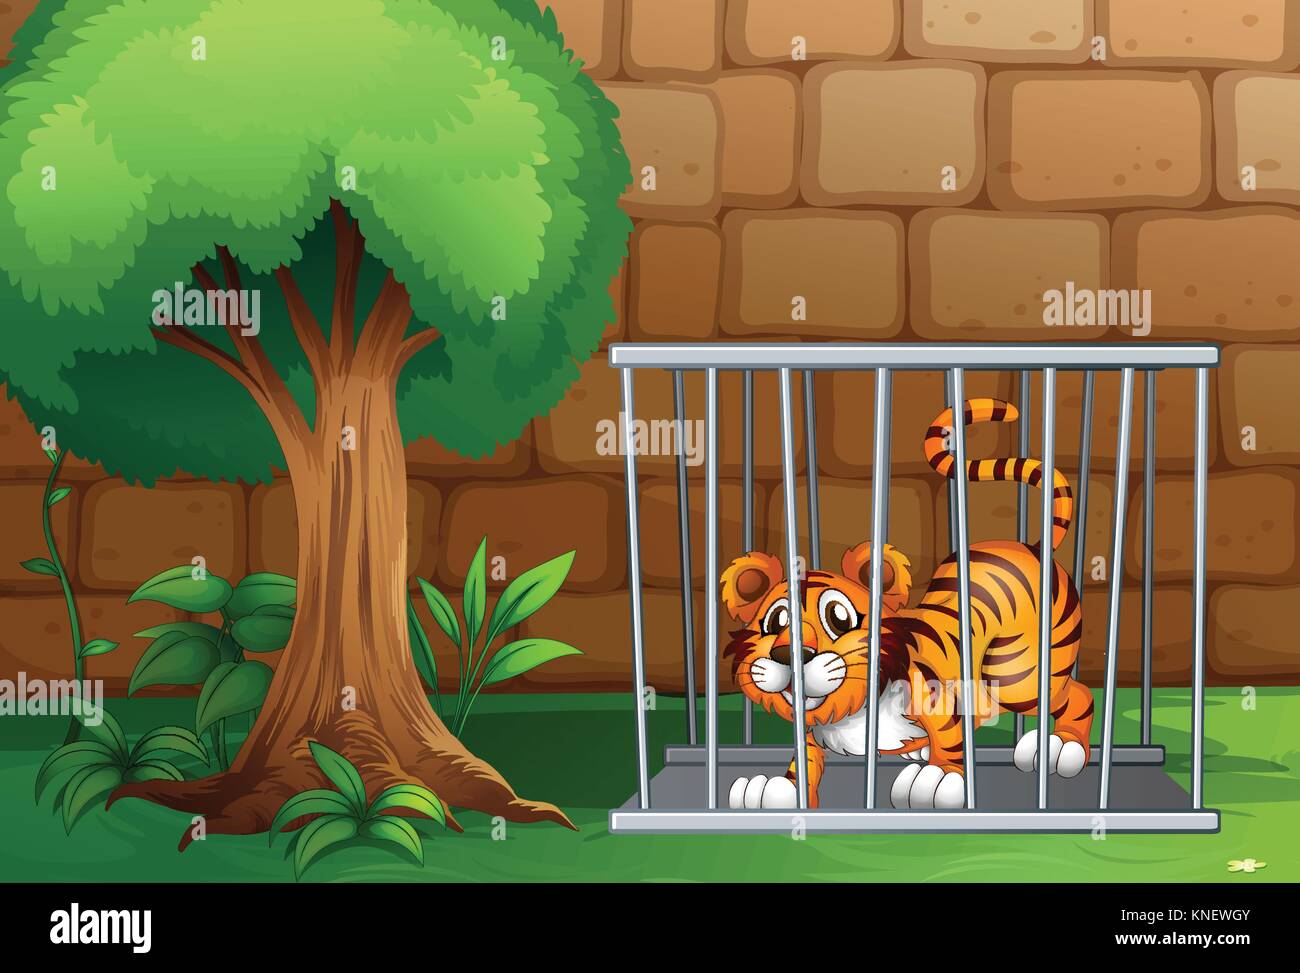 Illustration of a tiger in a cage and brick wall Stock Vector